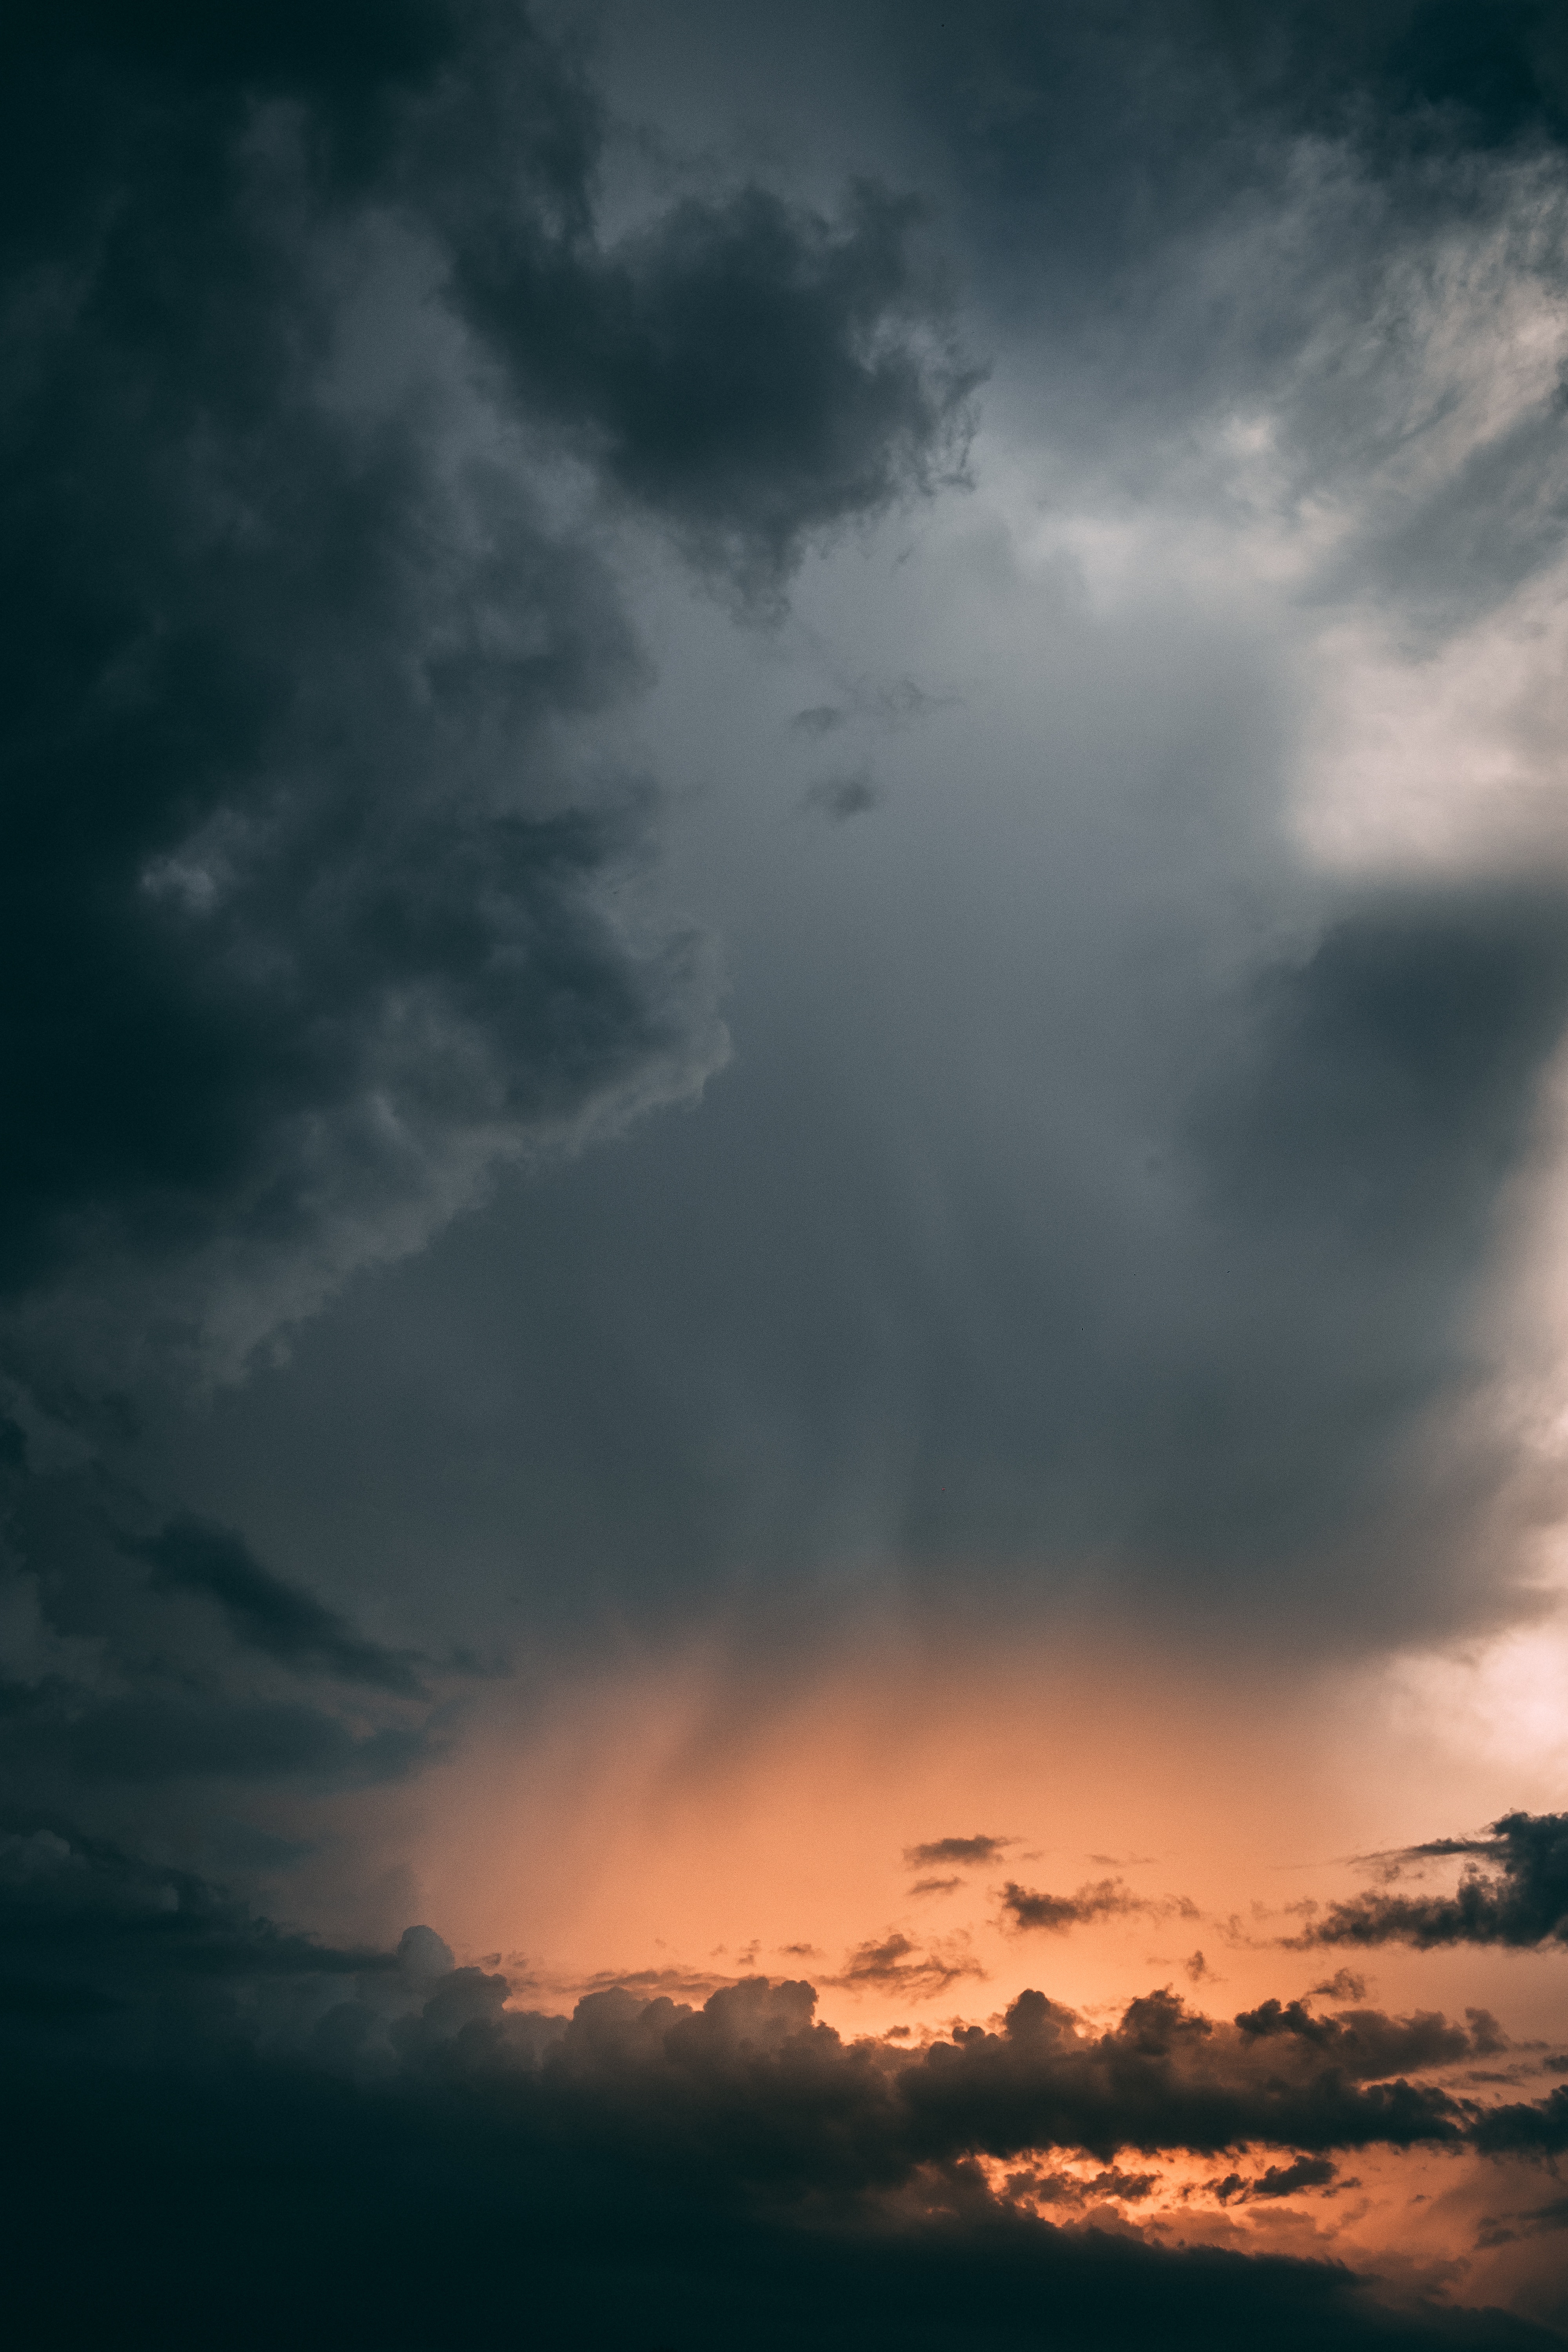 mainly cloudy, clouds, sky, night, nature, dark, overcast